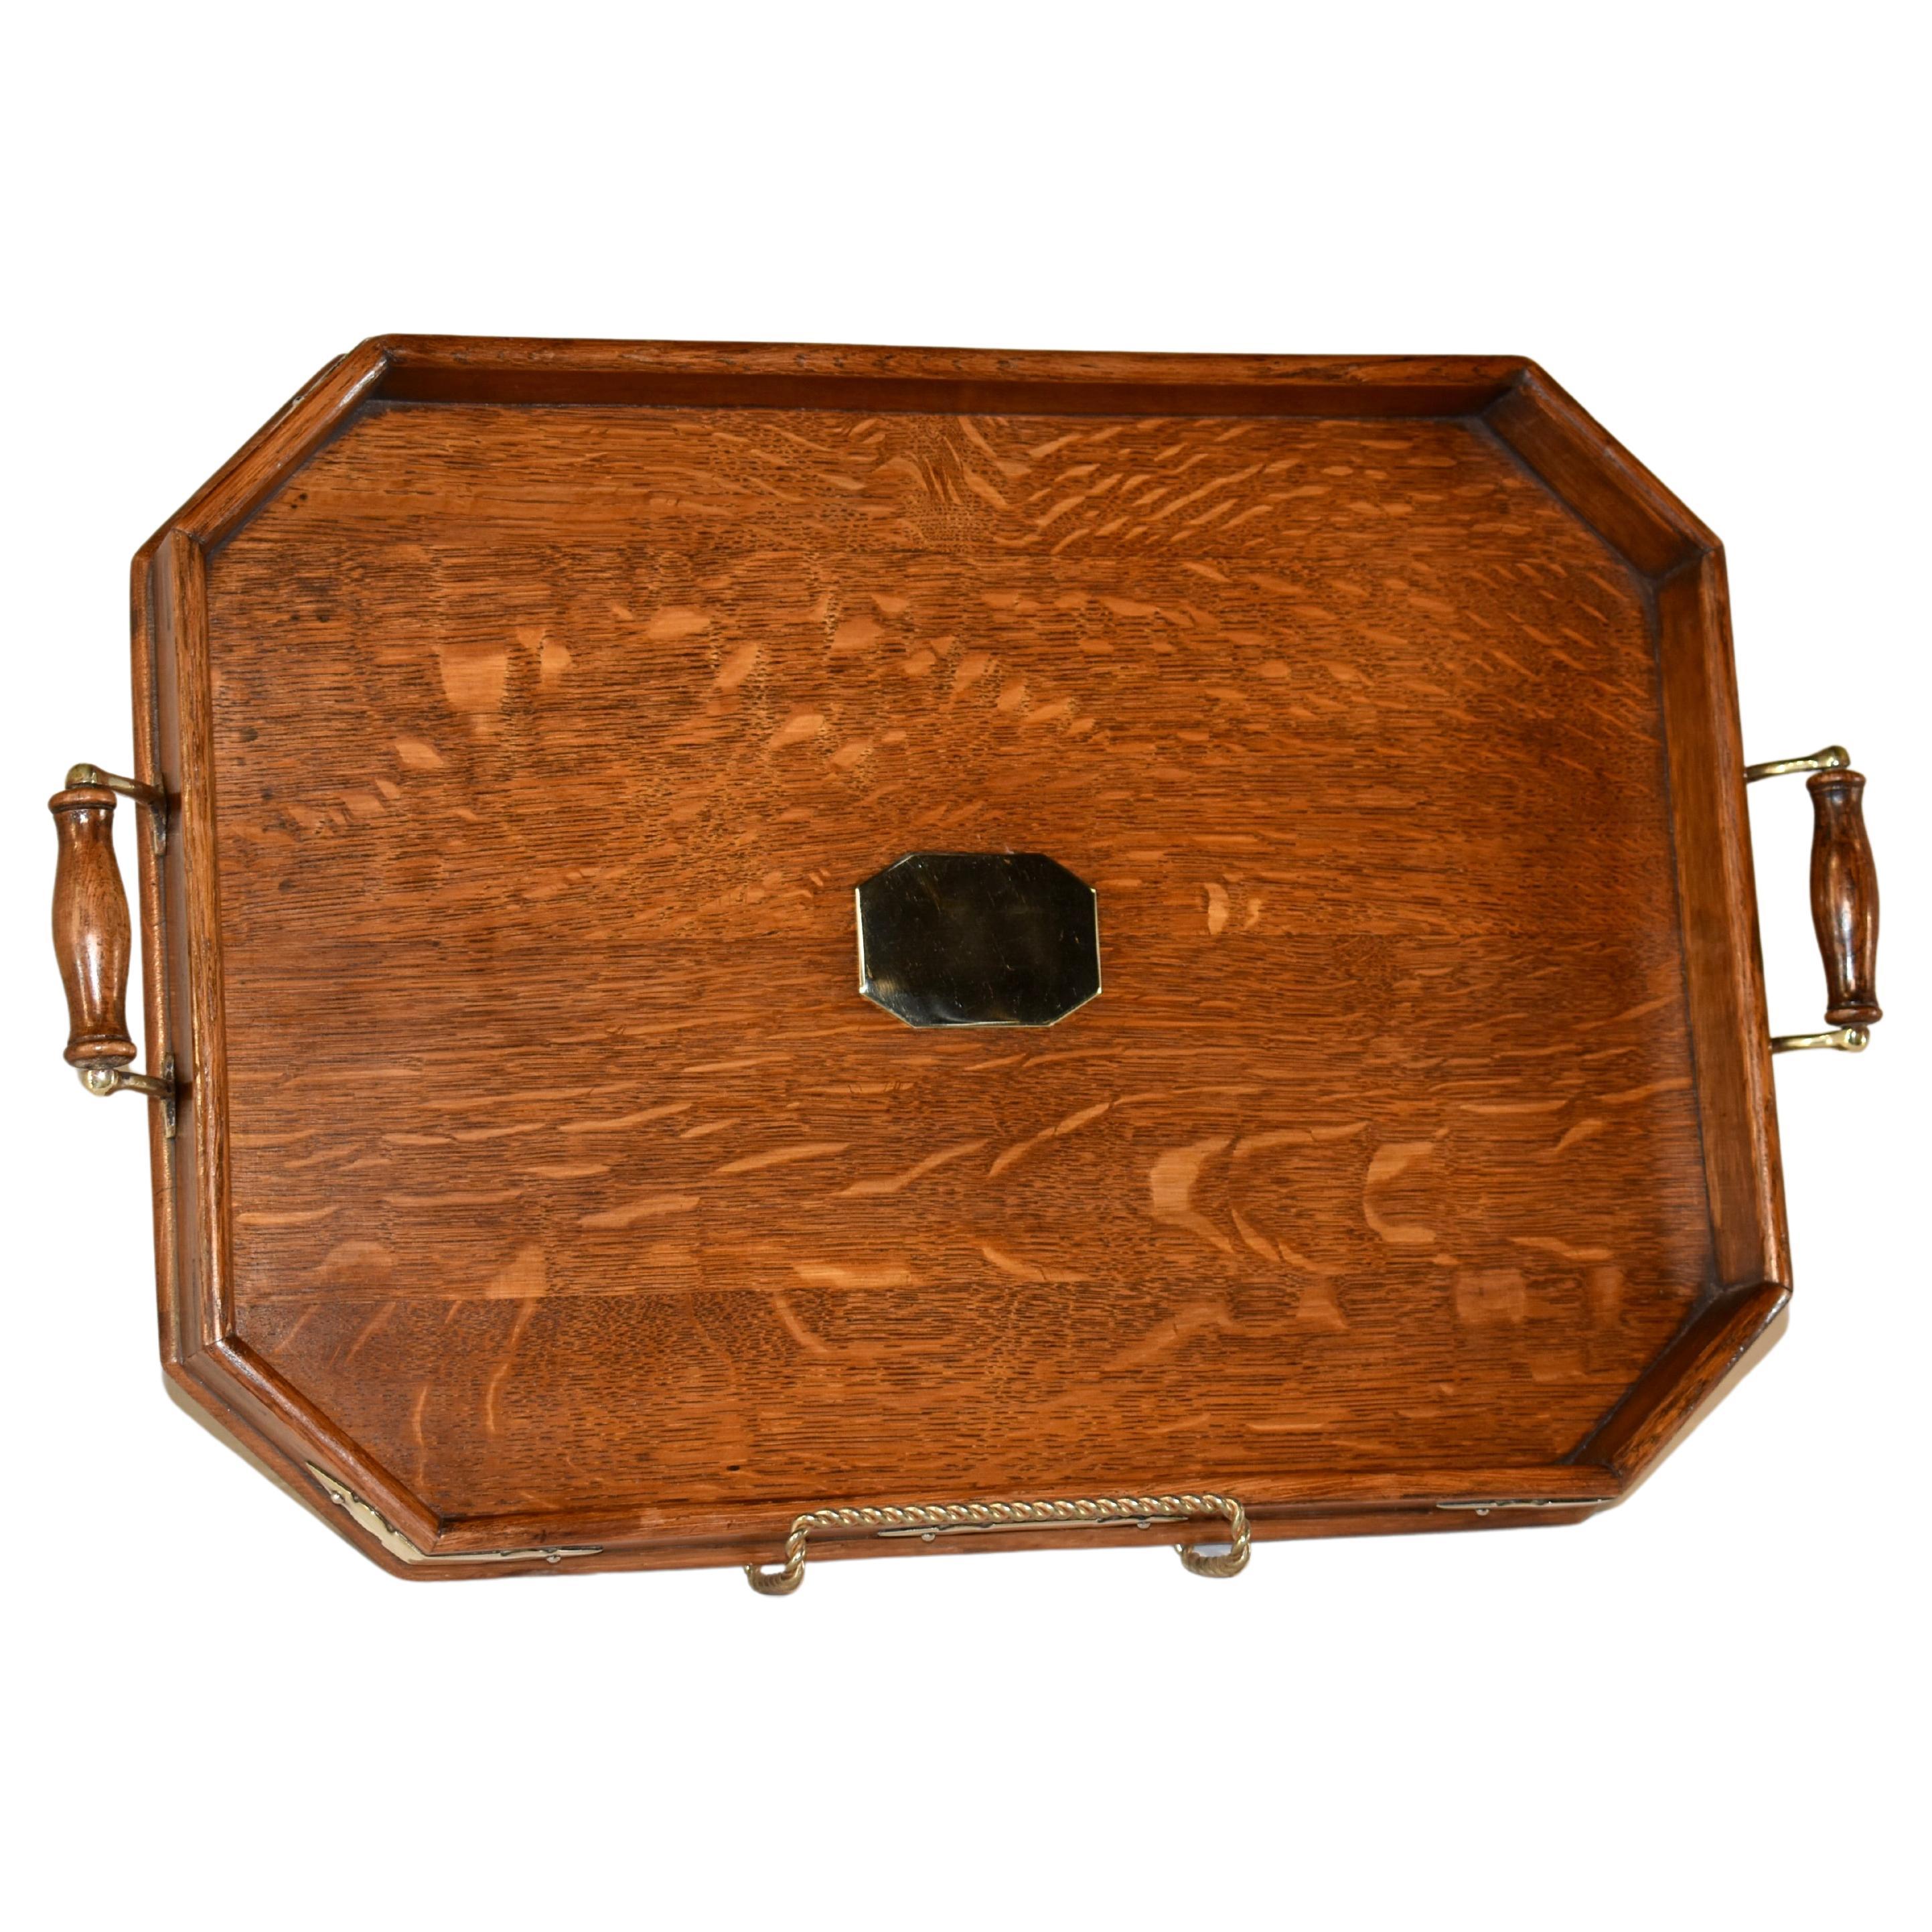 Late 19th Century English Serving Tray For Sale